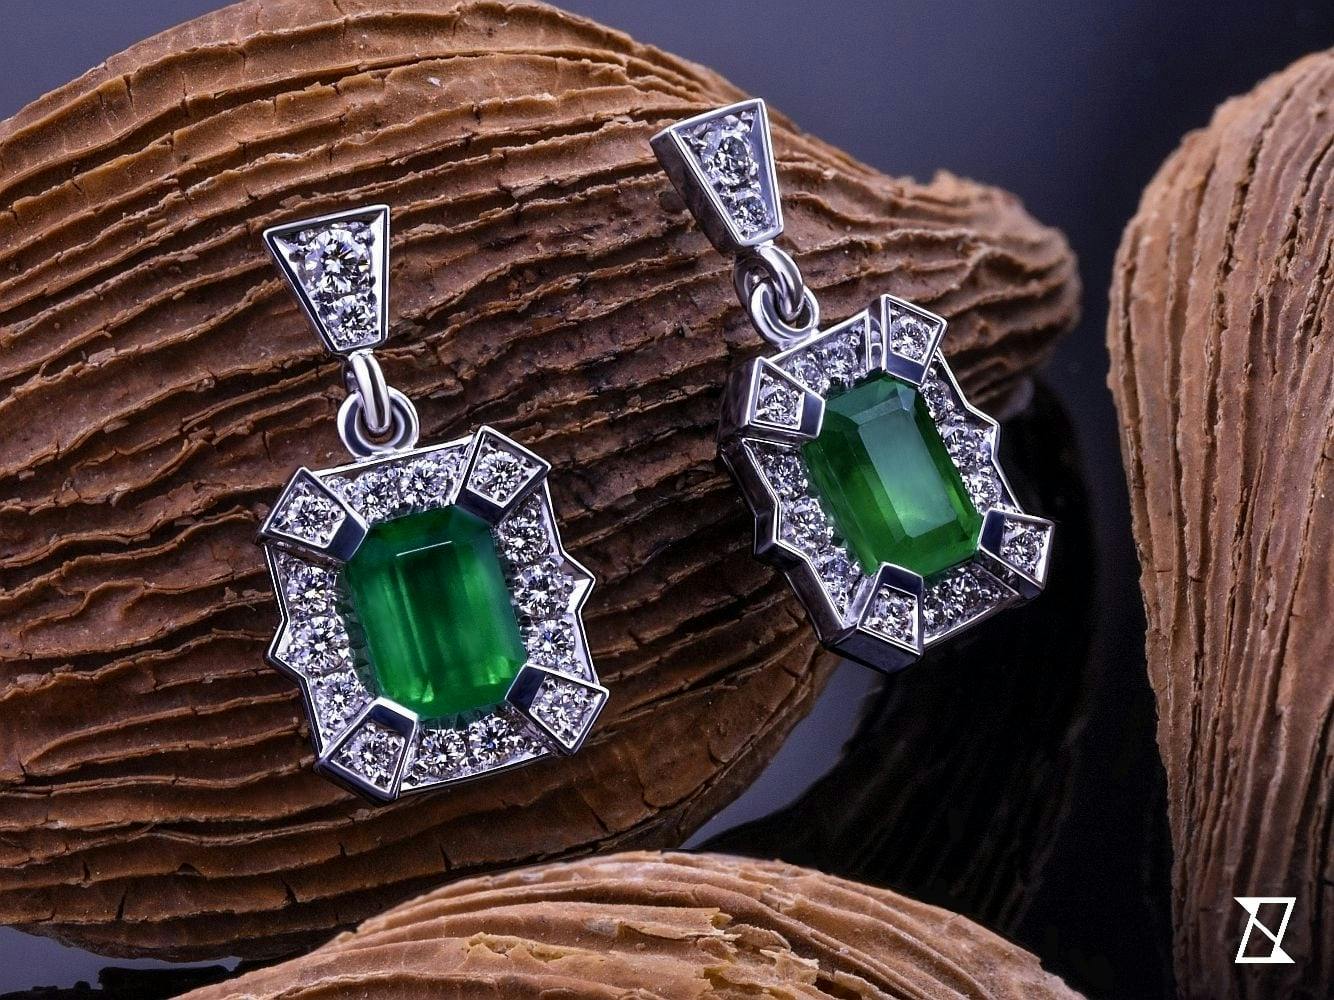 Earrings with colombian elemralds with diamonds in 14k white gold.